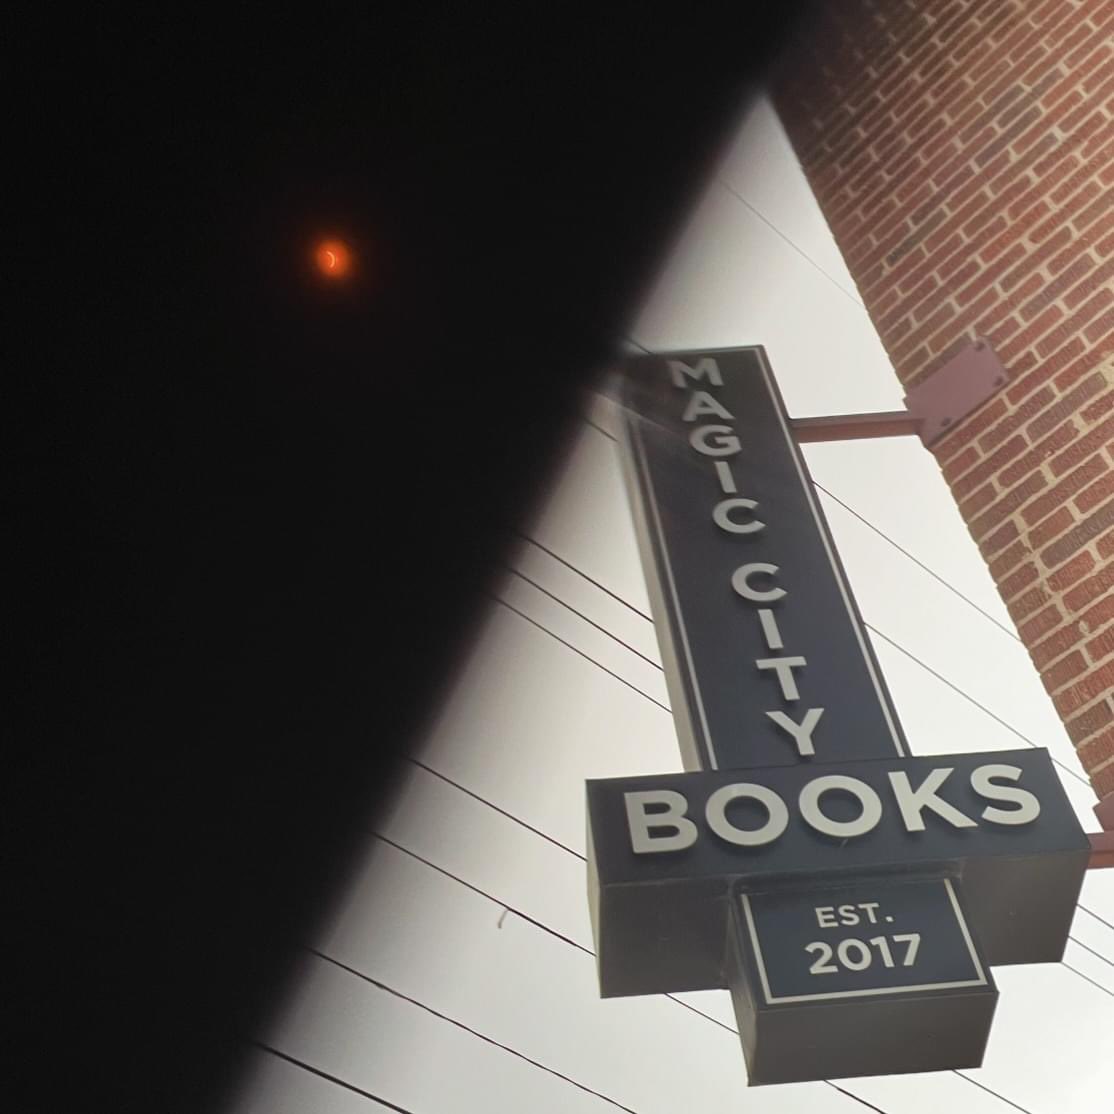 The #Eclipse outside the shop.